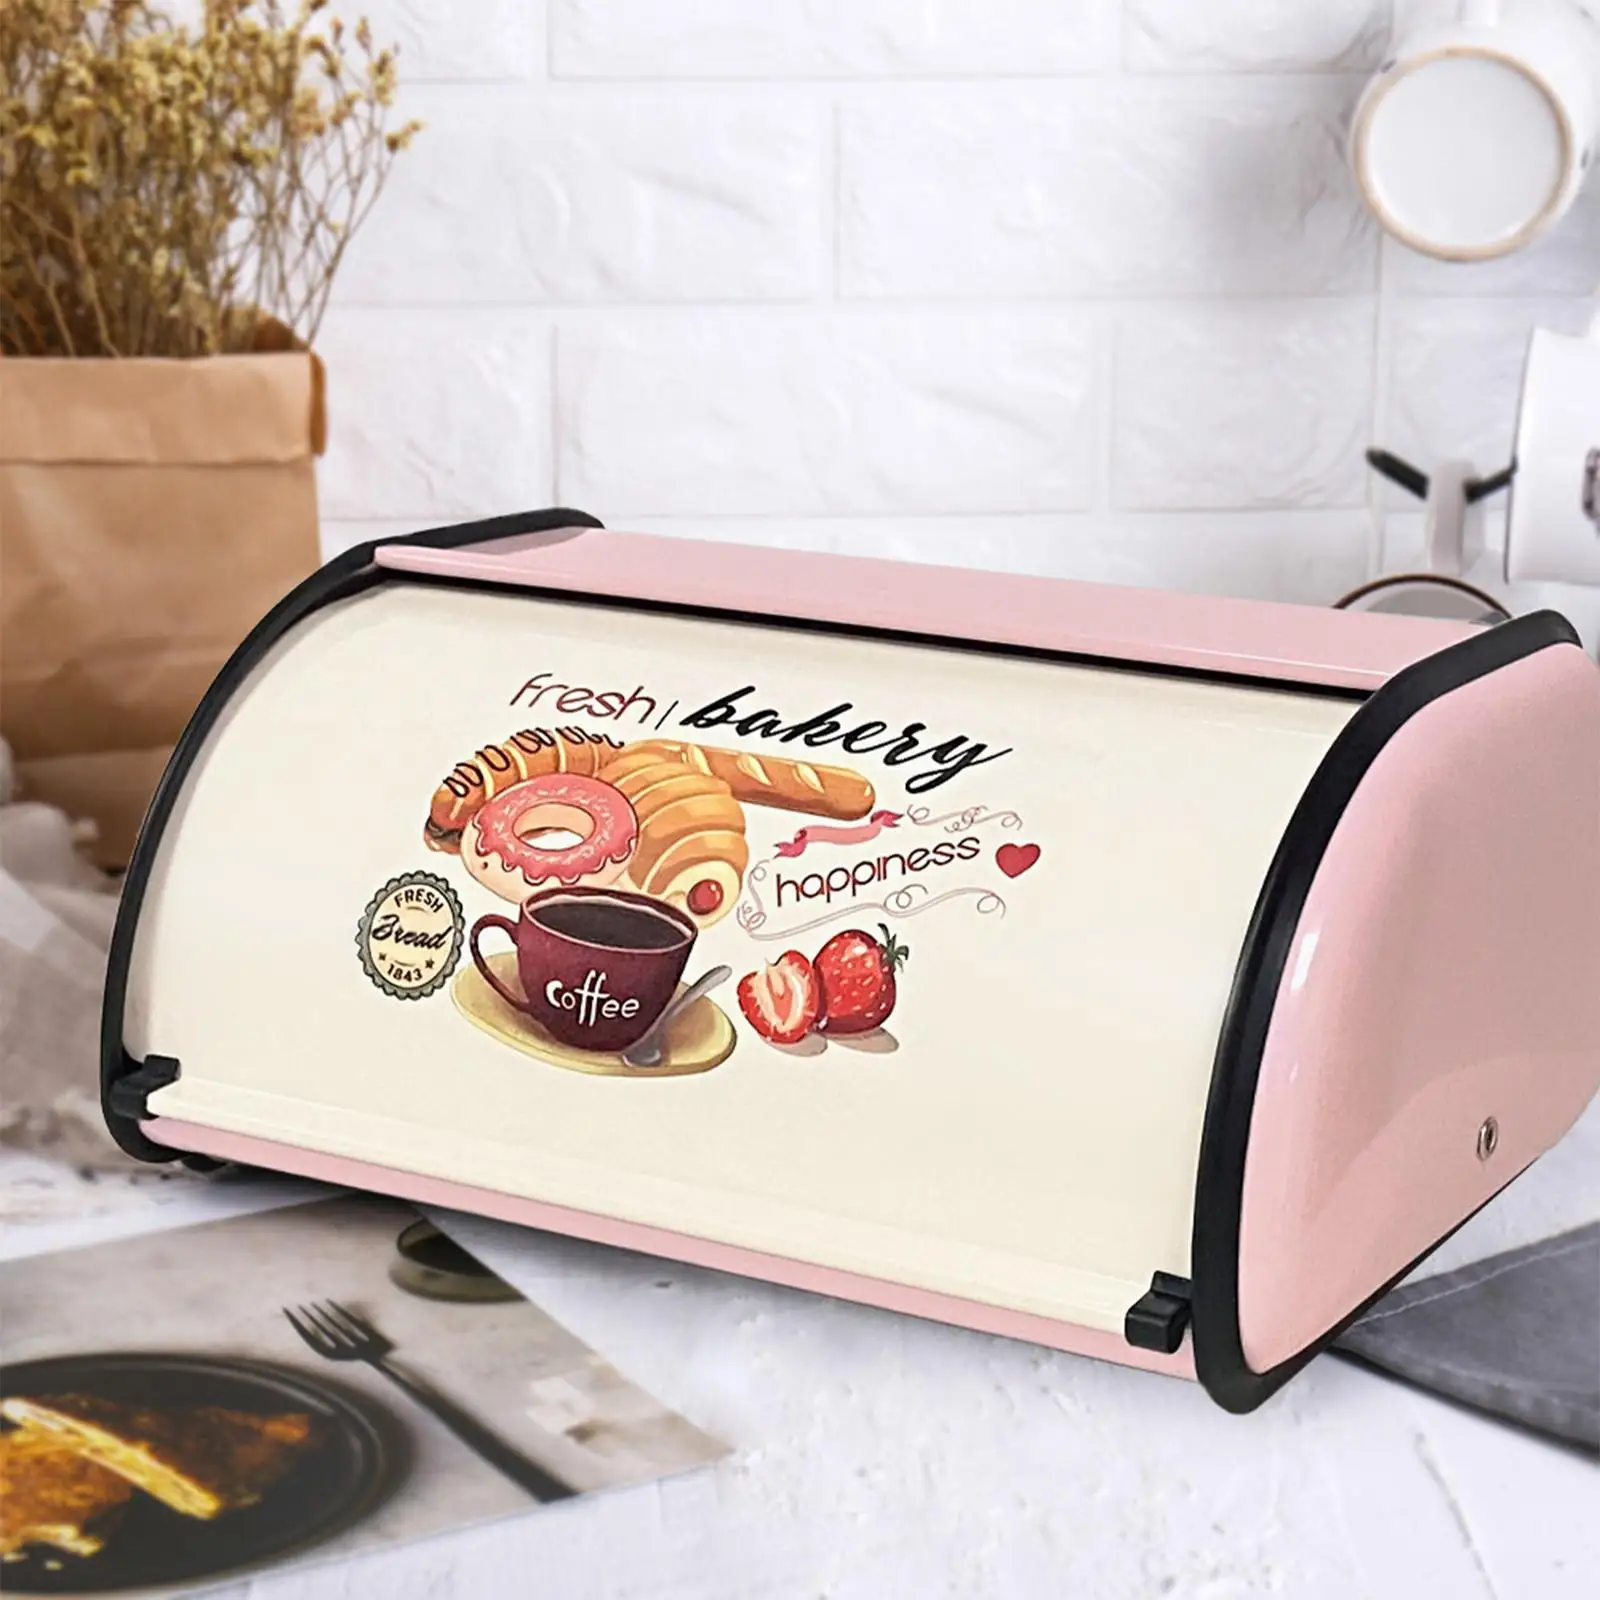 Bread Box Large with Roll Top Lid Rustic Metal Vintage Holder Organizer Container for Kitchen Home Counter Sandwiches Muffins